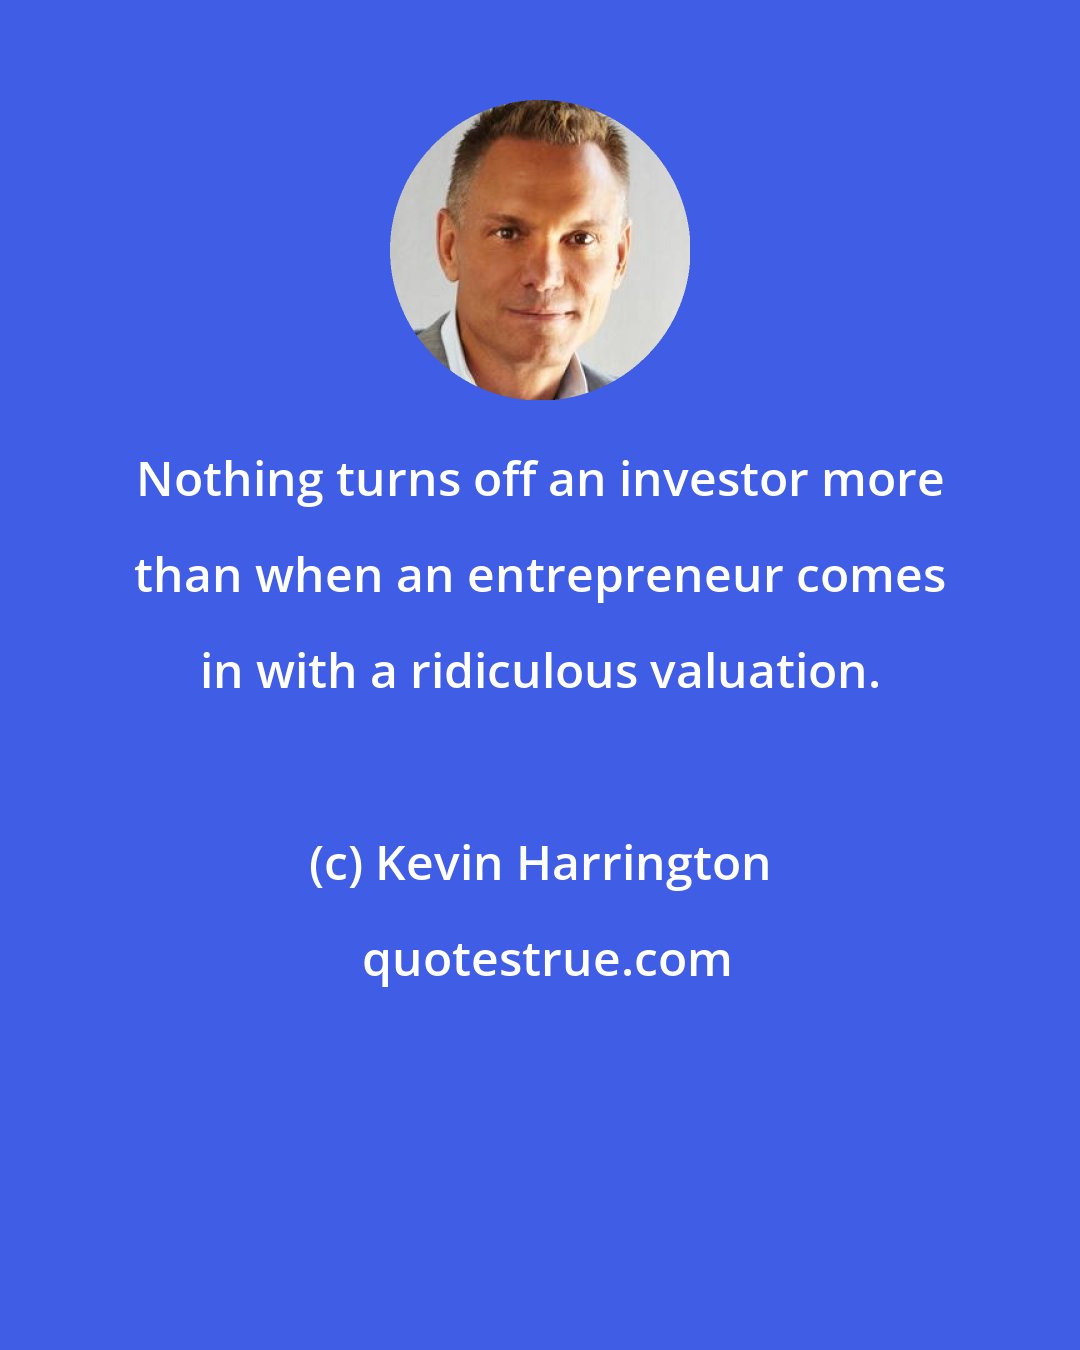 Kevin Harrington: Nothing turns off an investor more than when an entrepreneur comes in with a ridiculous valuation.